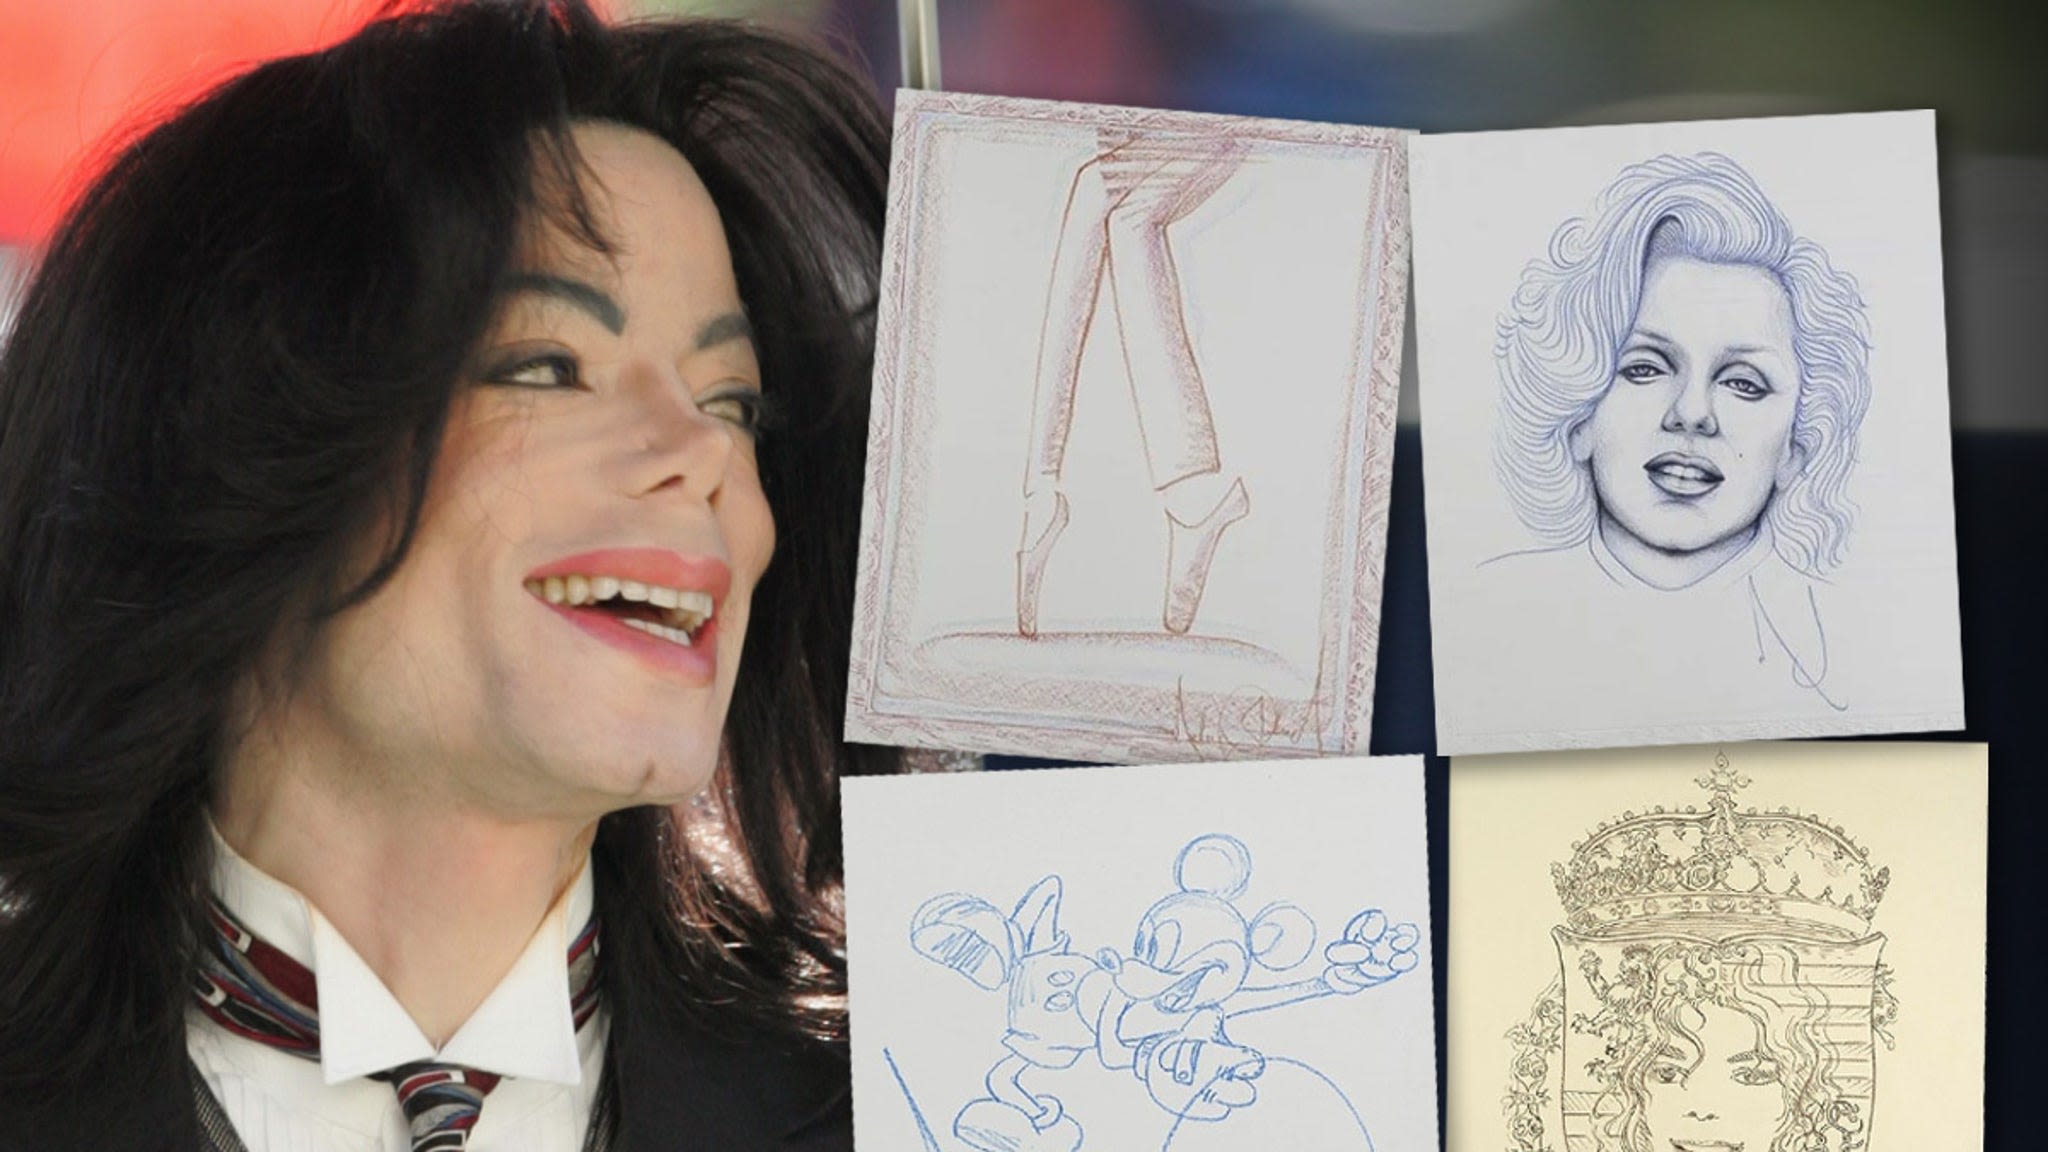 Michael Jackson's Purported Signed Sketches to Be Auctioned Off, Estate Skeptial